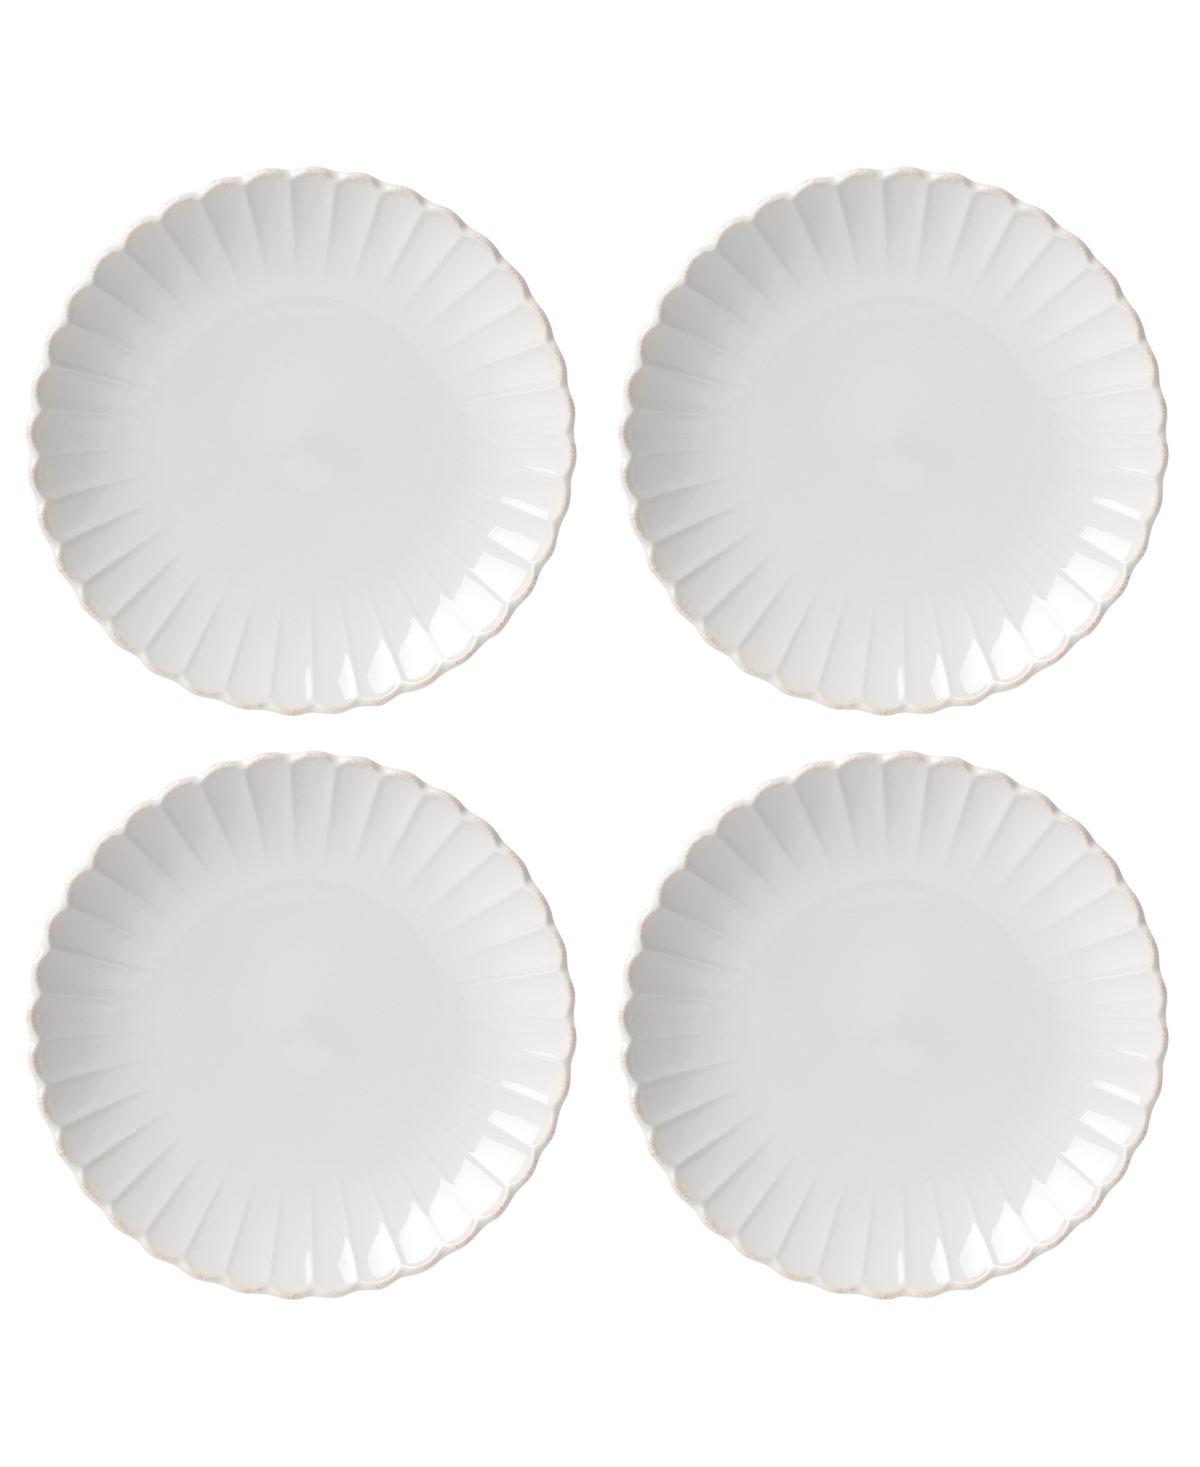 French Perle Scallop Dinner Plates 4-Piece Set, Service for 4 - White